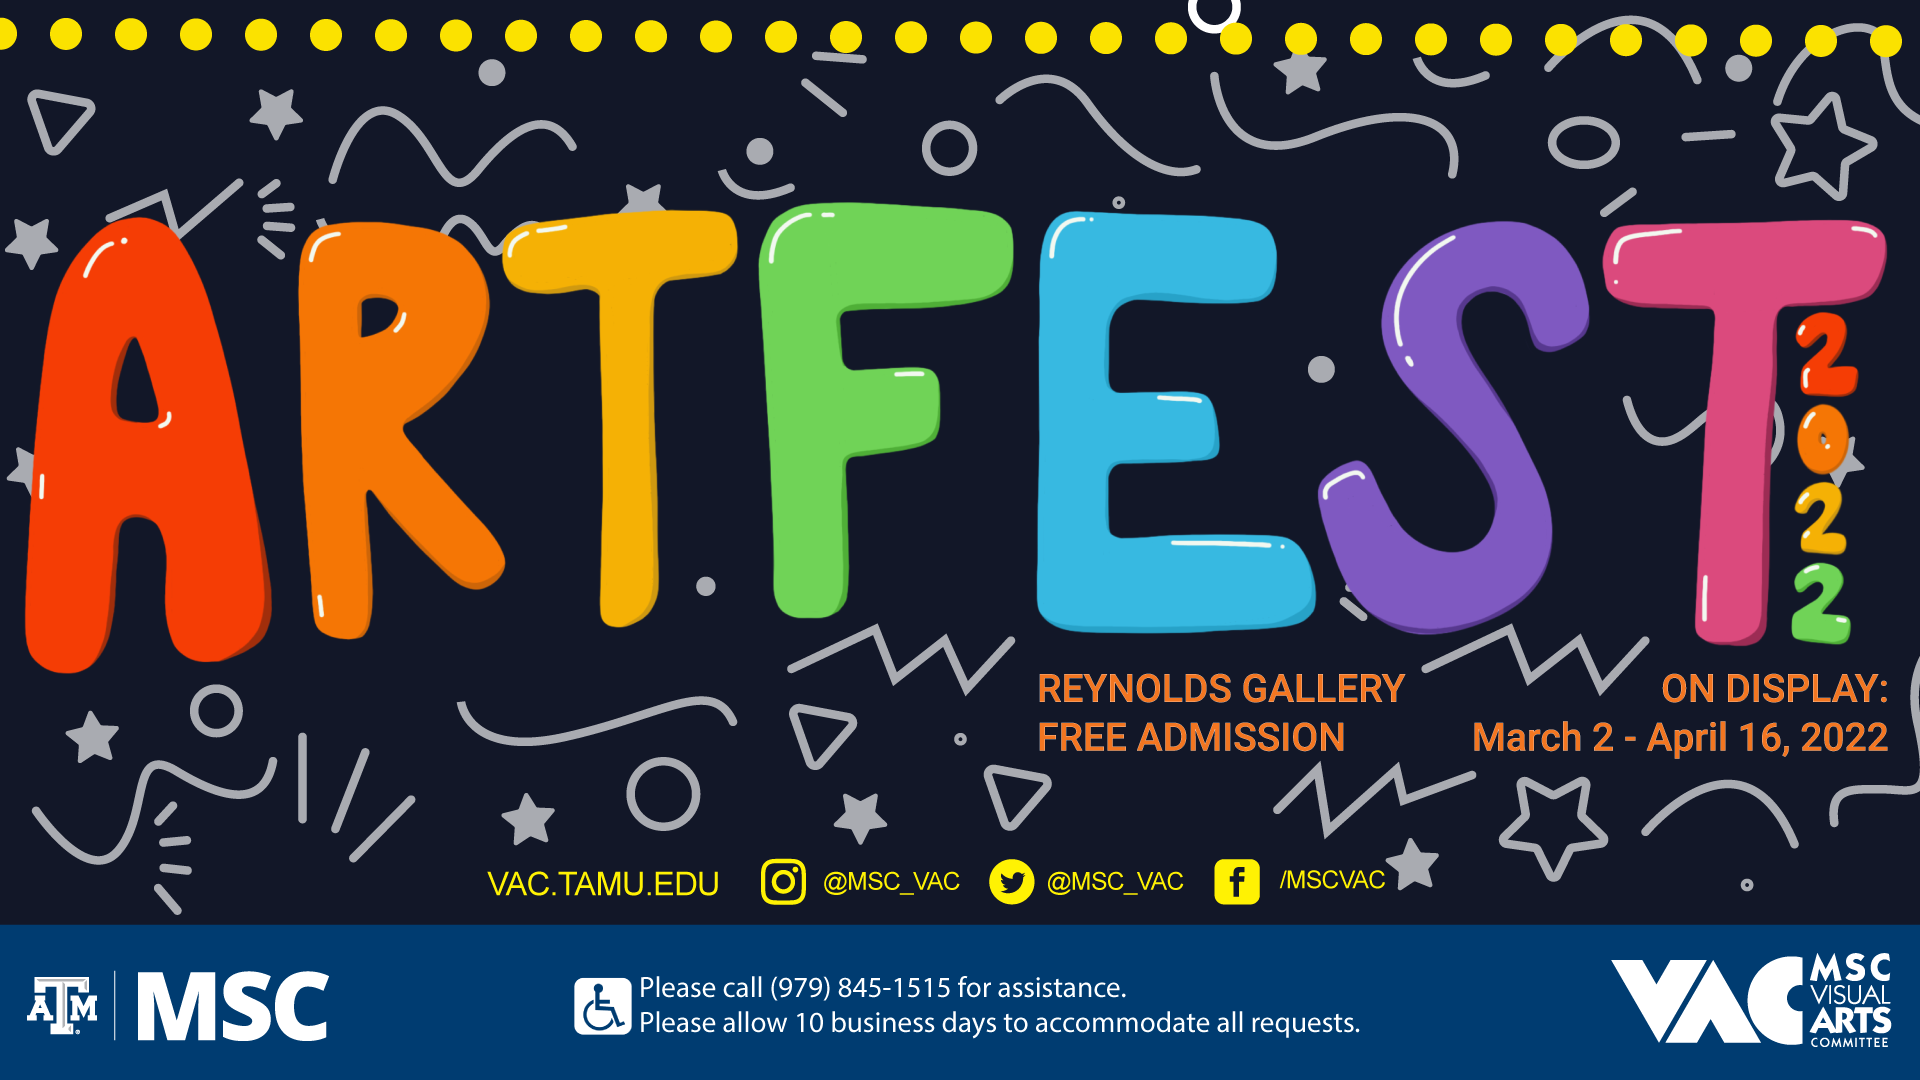 MSC Visual Arts Committee Presents: ArtFest 2022, On Display: March 2 to April 16, 2022. At Reynolds Gallery. Free Admission. Website: vac.tamu.edu. Instagram: @msc_vac. Twitter: @msc_vac. Facebook: @MSCVAC Please call (979) 845-1515 for assistance. Please allow 10 business days to accommodate all requests.